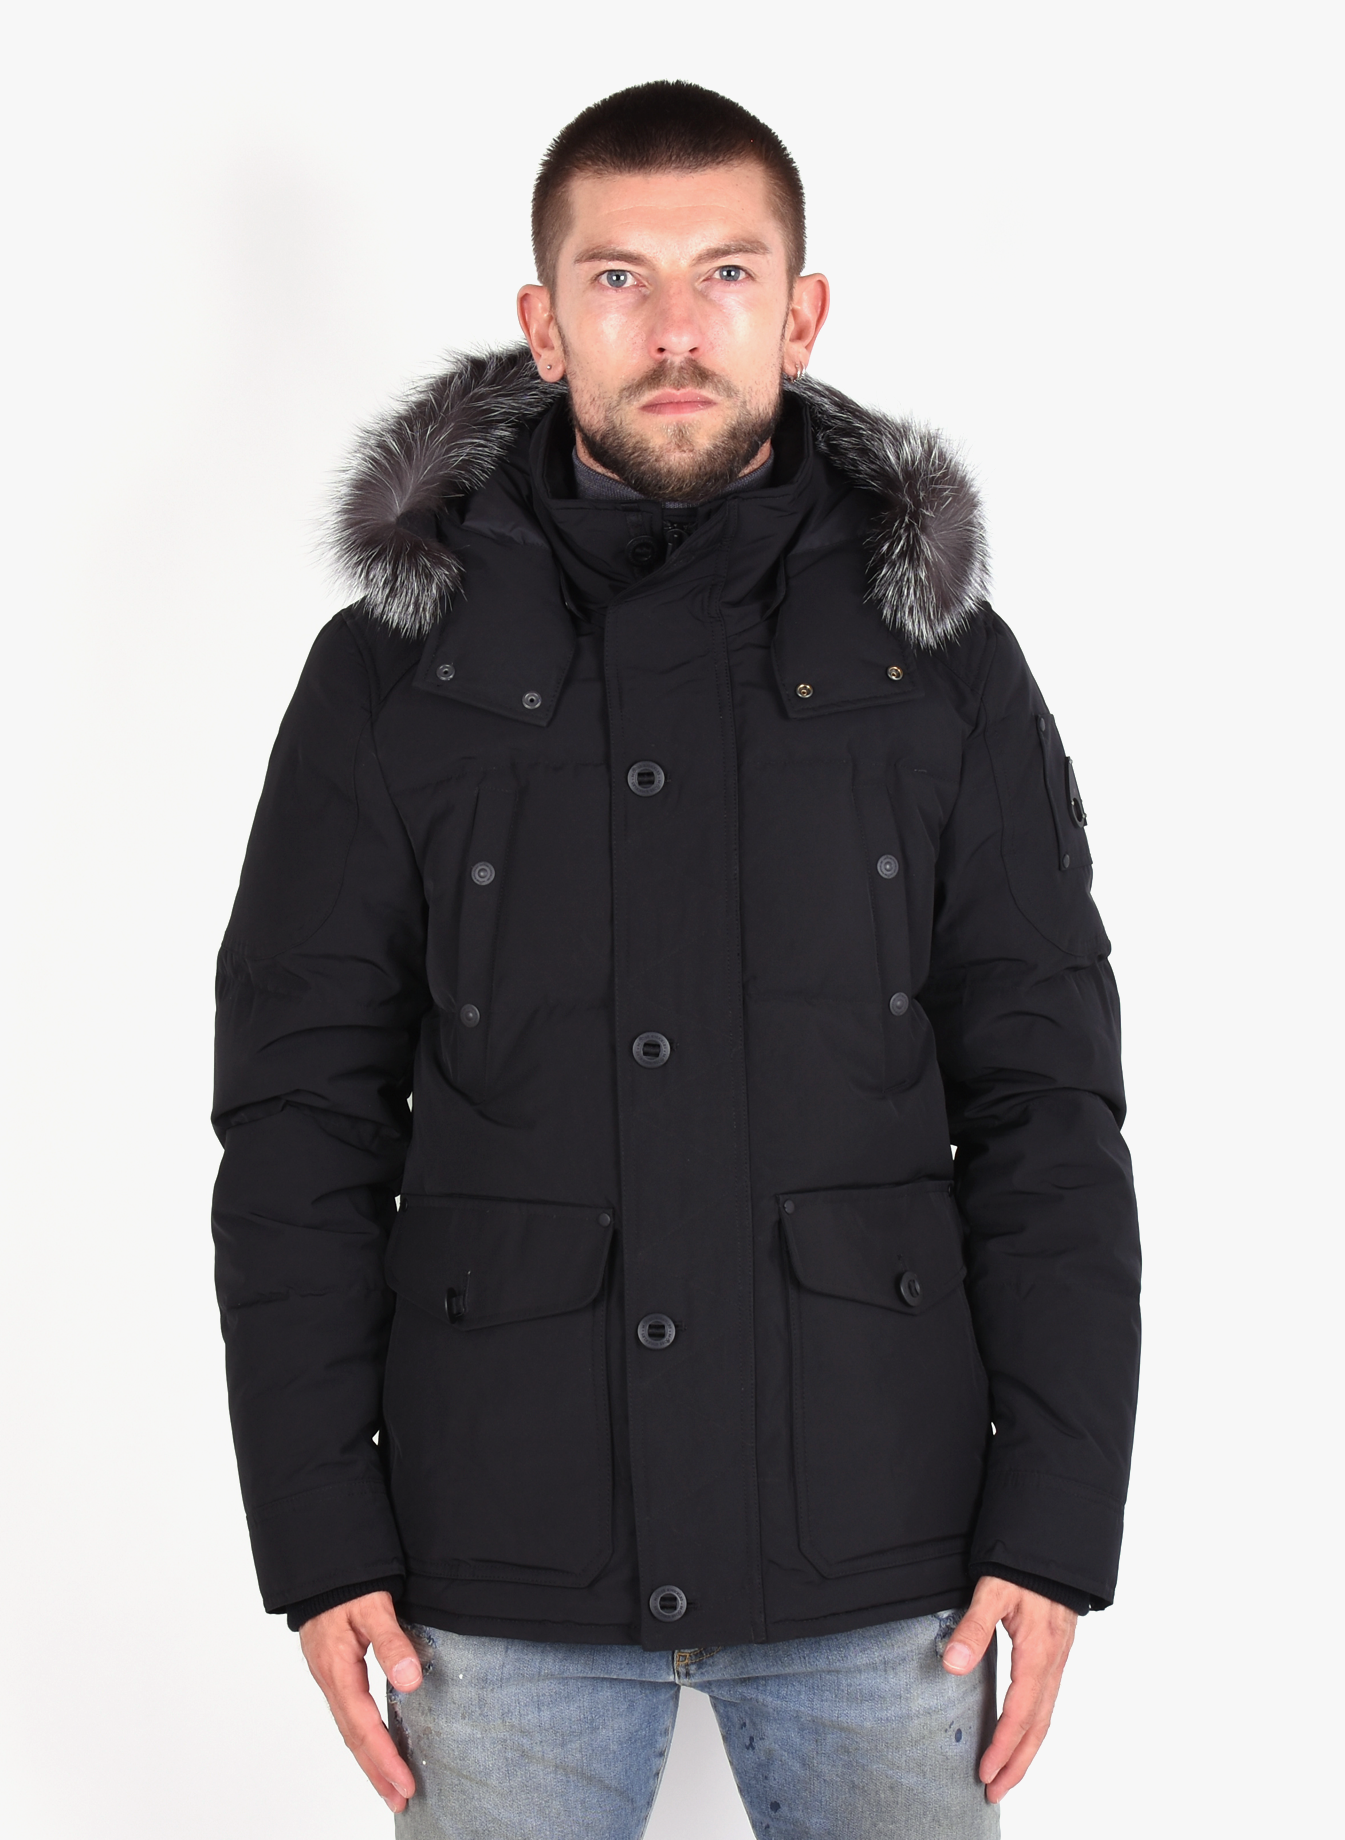 Moose Knuckles 'Round Island' Jacket Black Frost FW19 - Mensquare